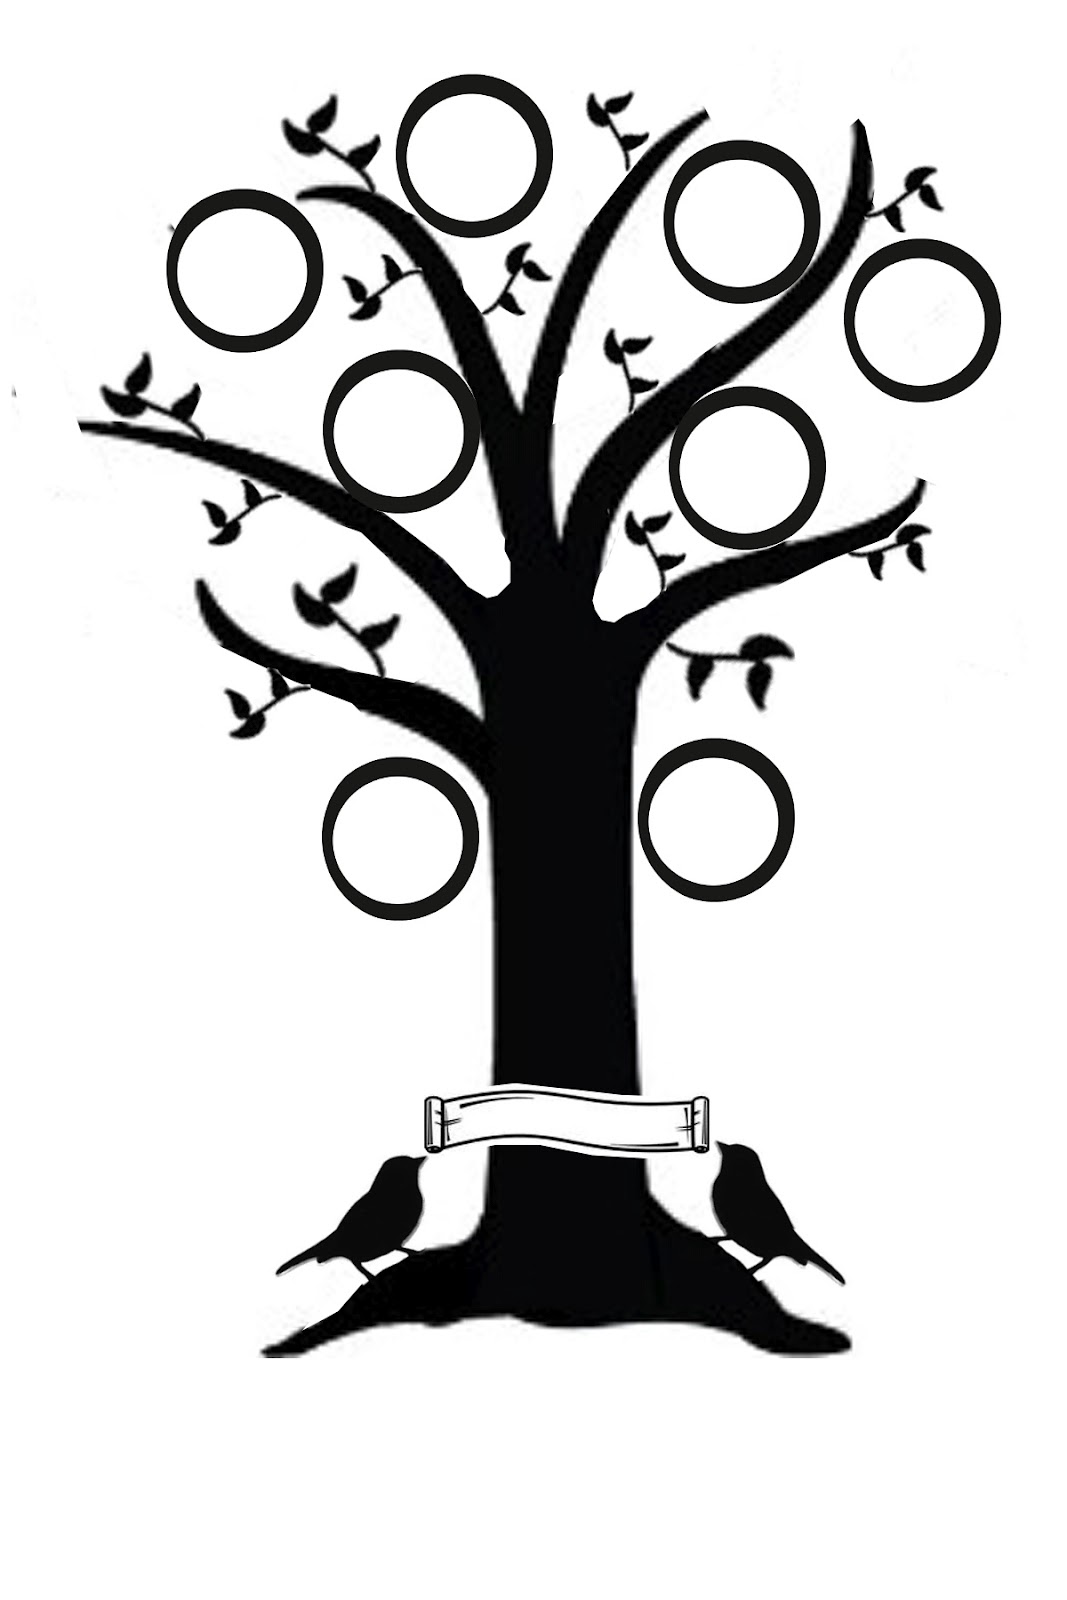 Bare Tree Images - ClipArt Best